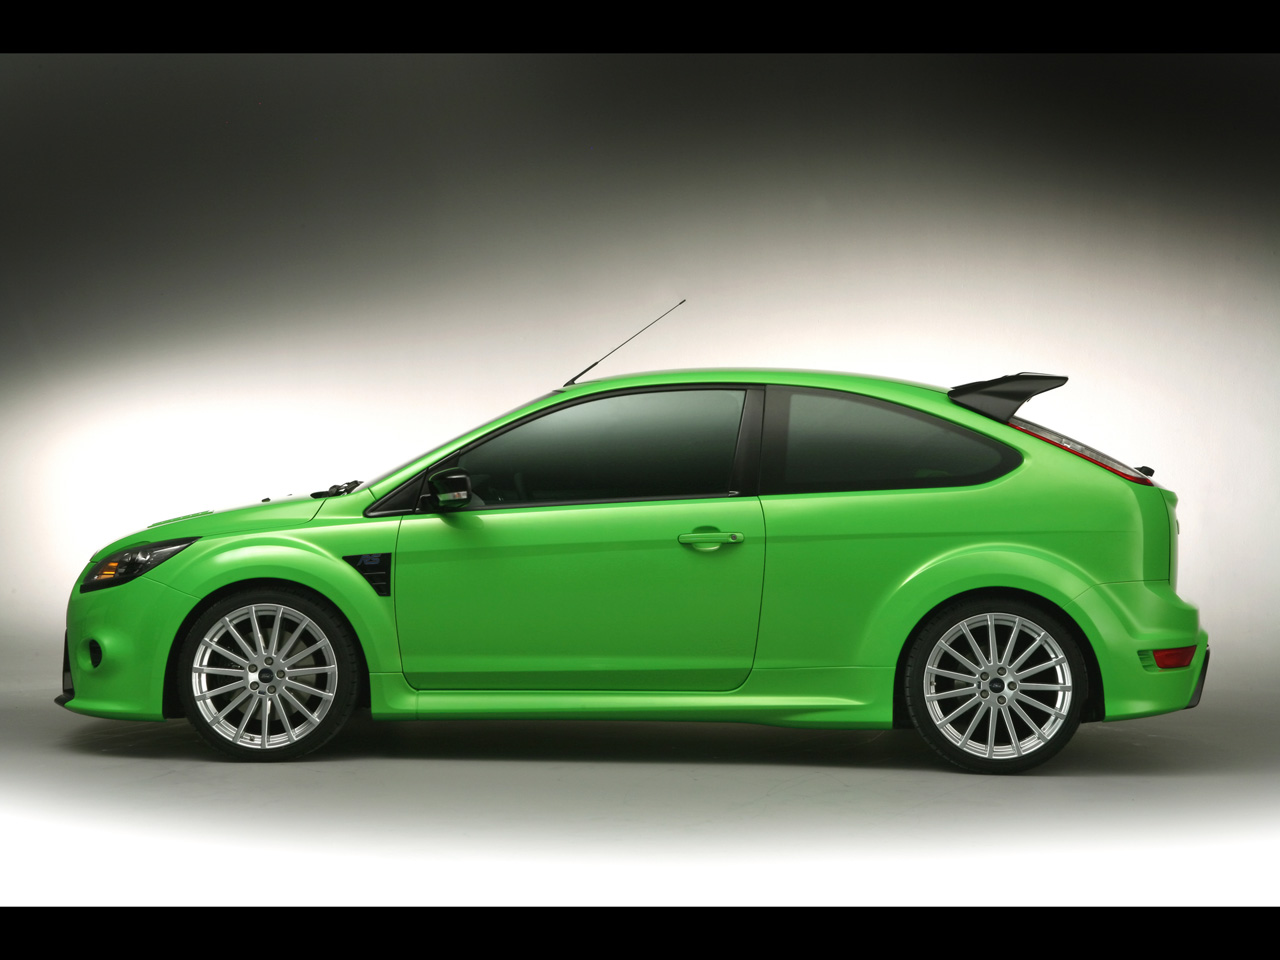 [2009-Ford-Focus-RS-Side-1280x960.jpg]